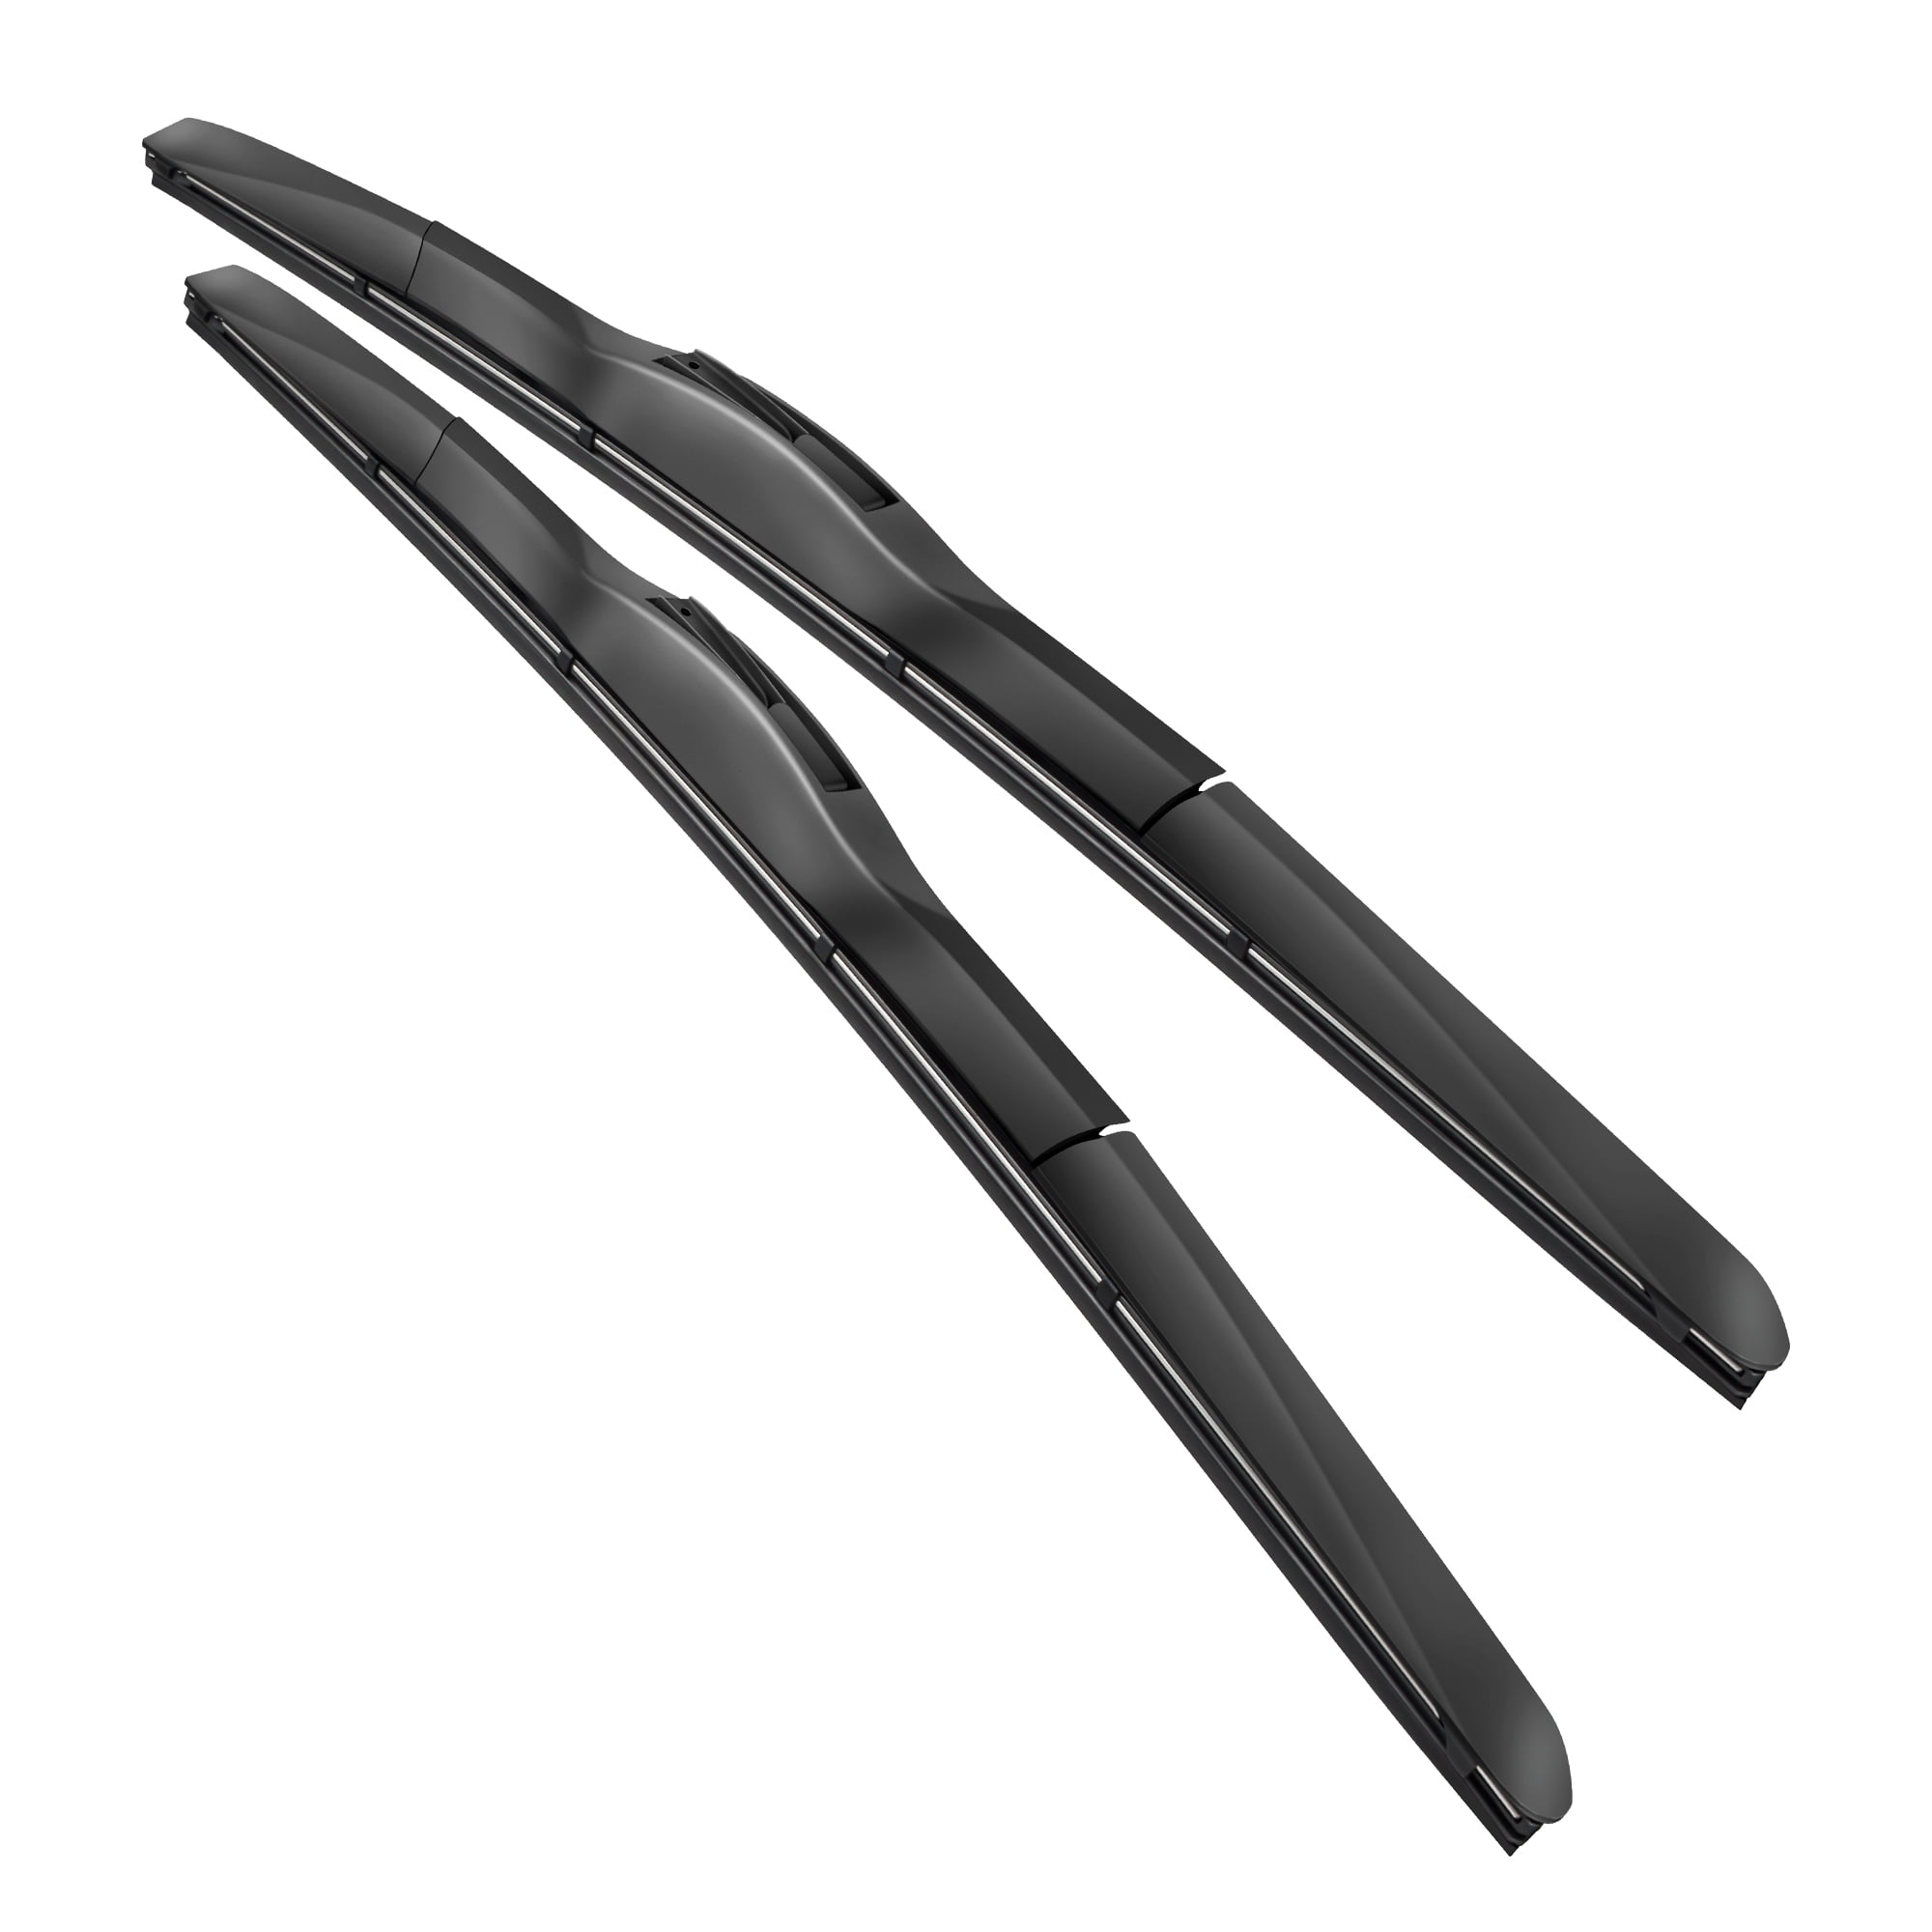 Erasior 22 in & 22 in Windshield Wiper Blades Fit For Cadillac Escalade 2005  22